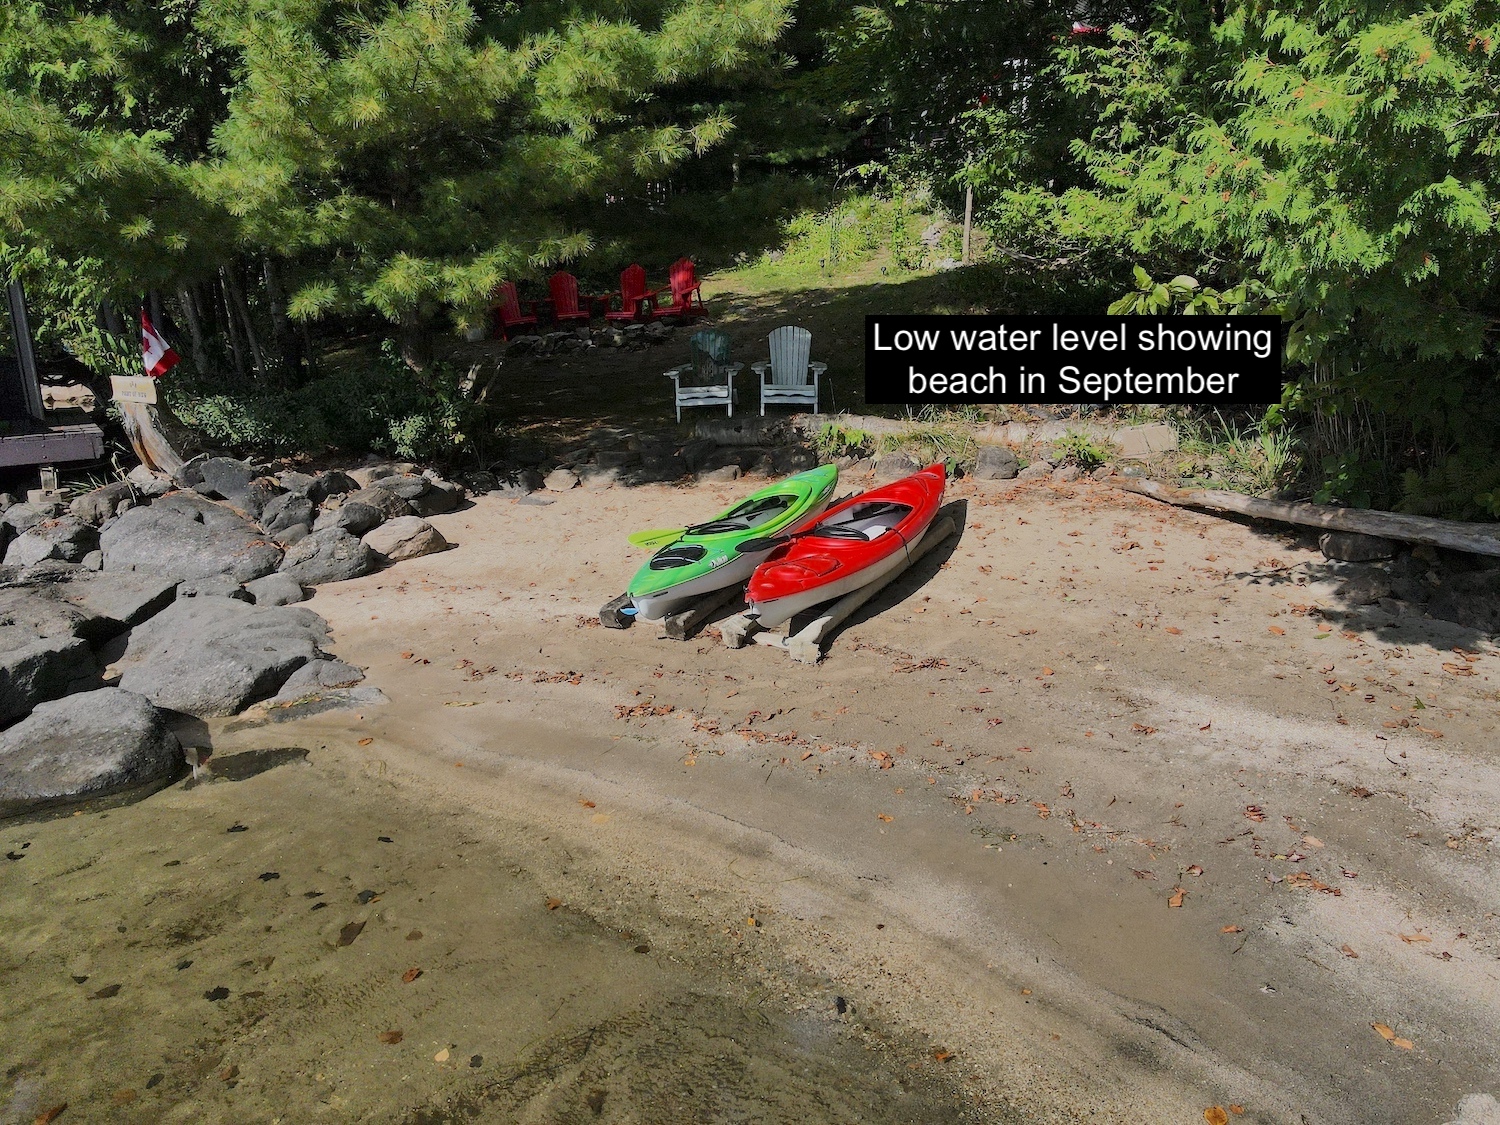 Eagle Lake Kazway Chalet - Sandy Beach and Kayaks in September